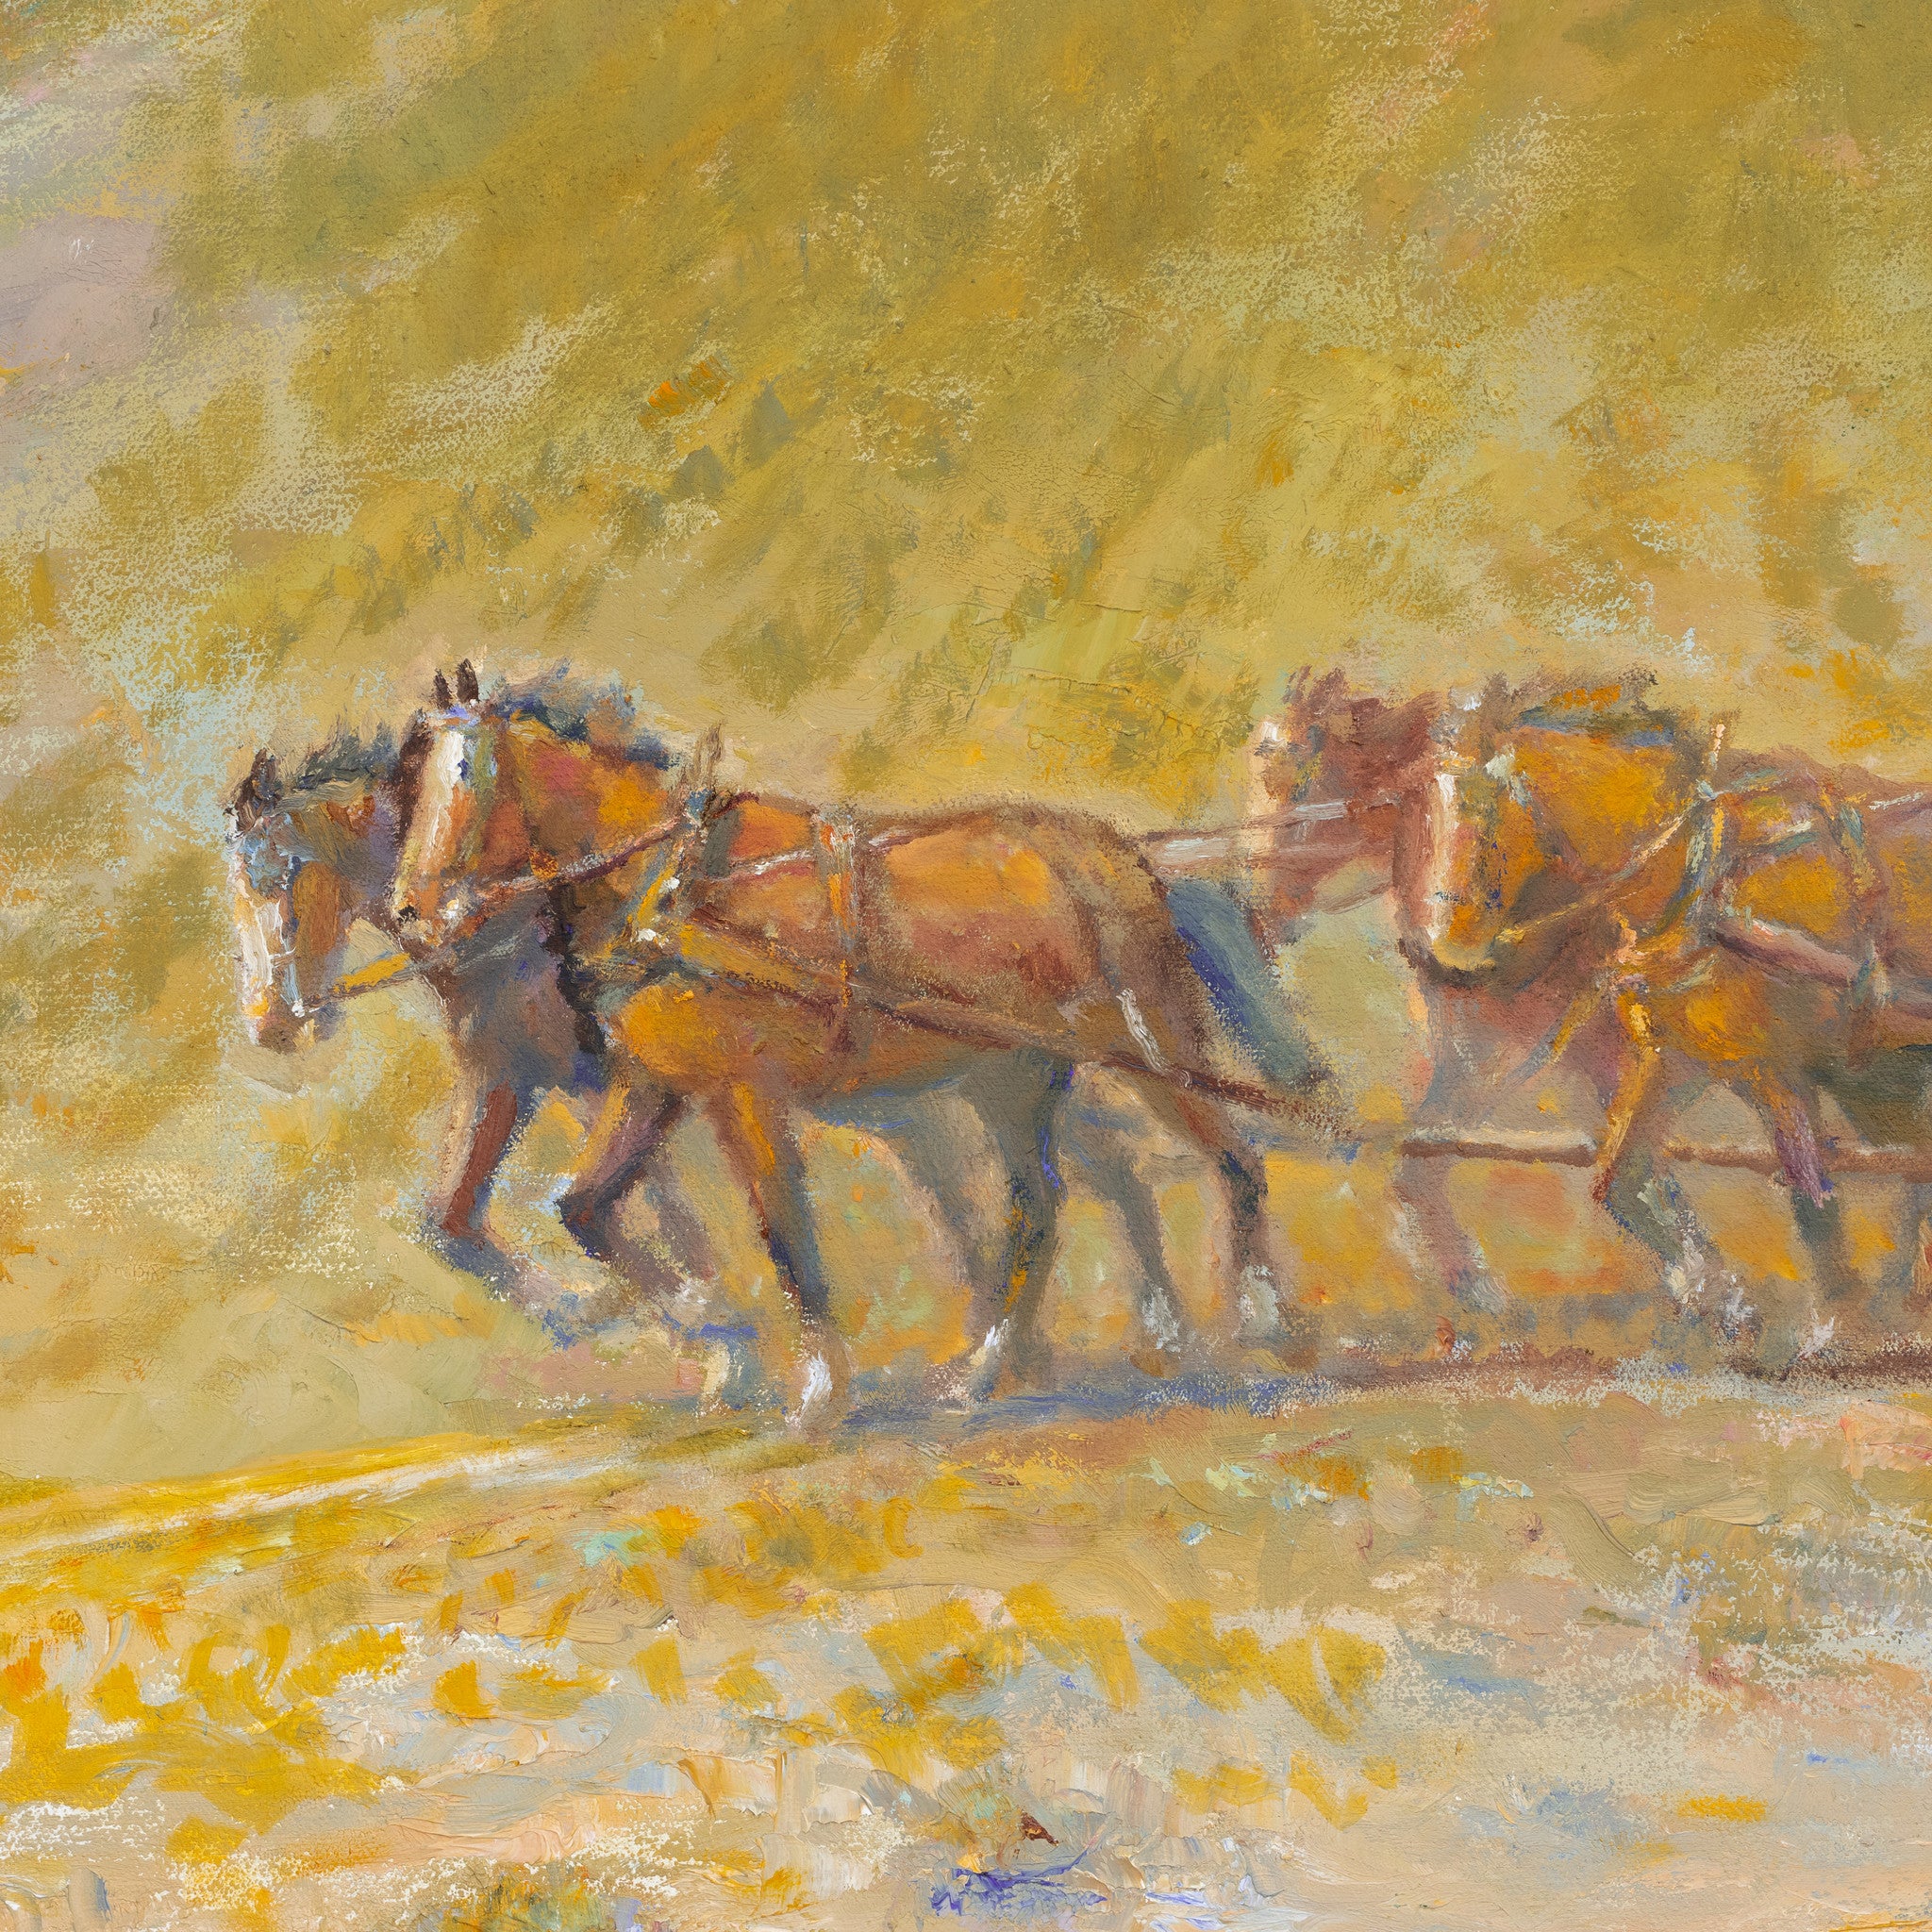 Wells Fargo-60 Miles a Day (Change Horses Every 30 Miles) by Jim Carkhuff